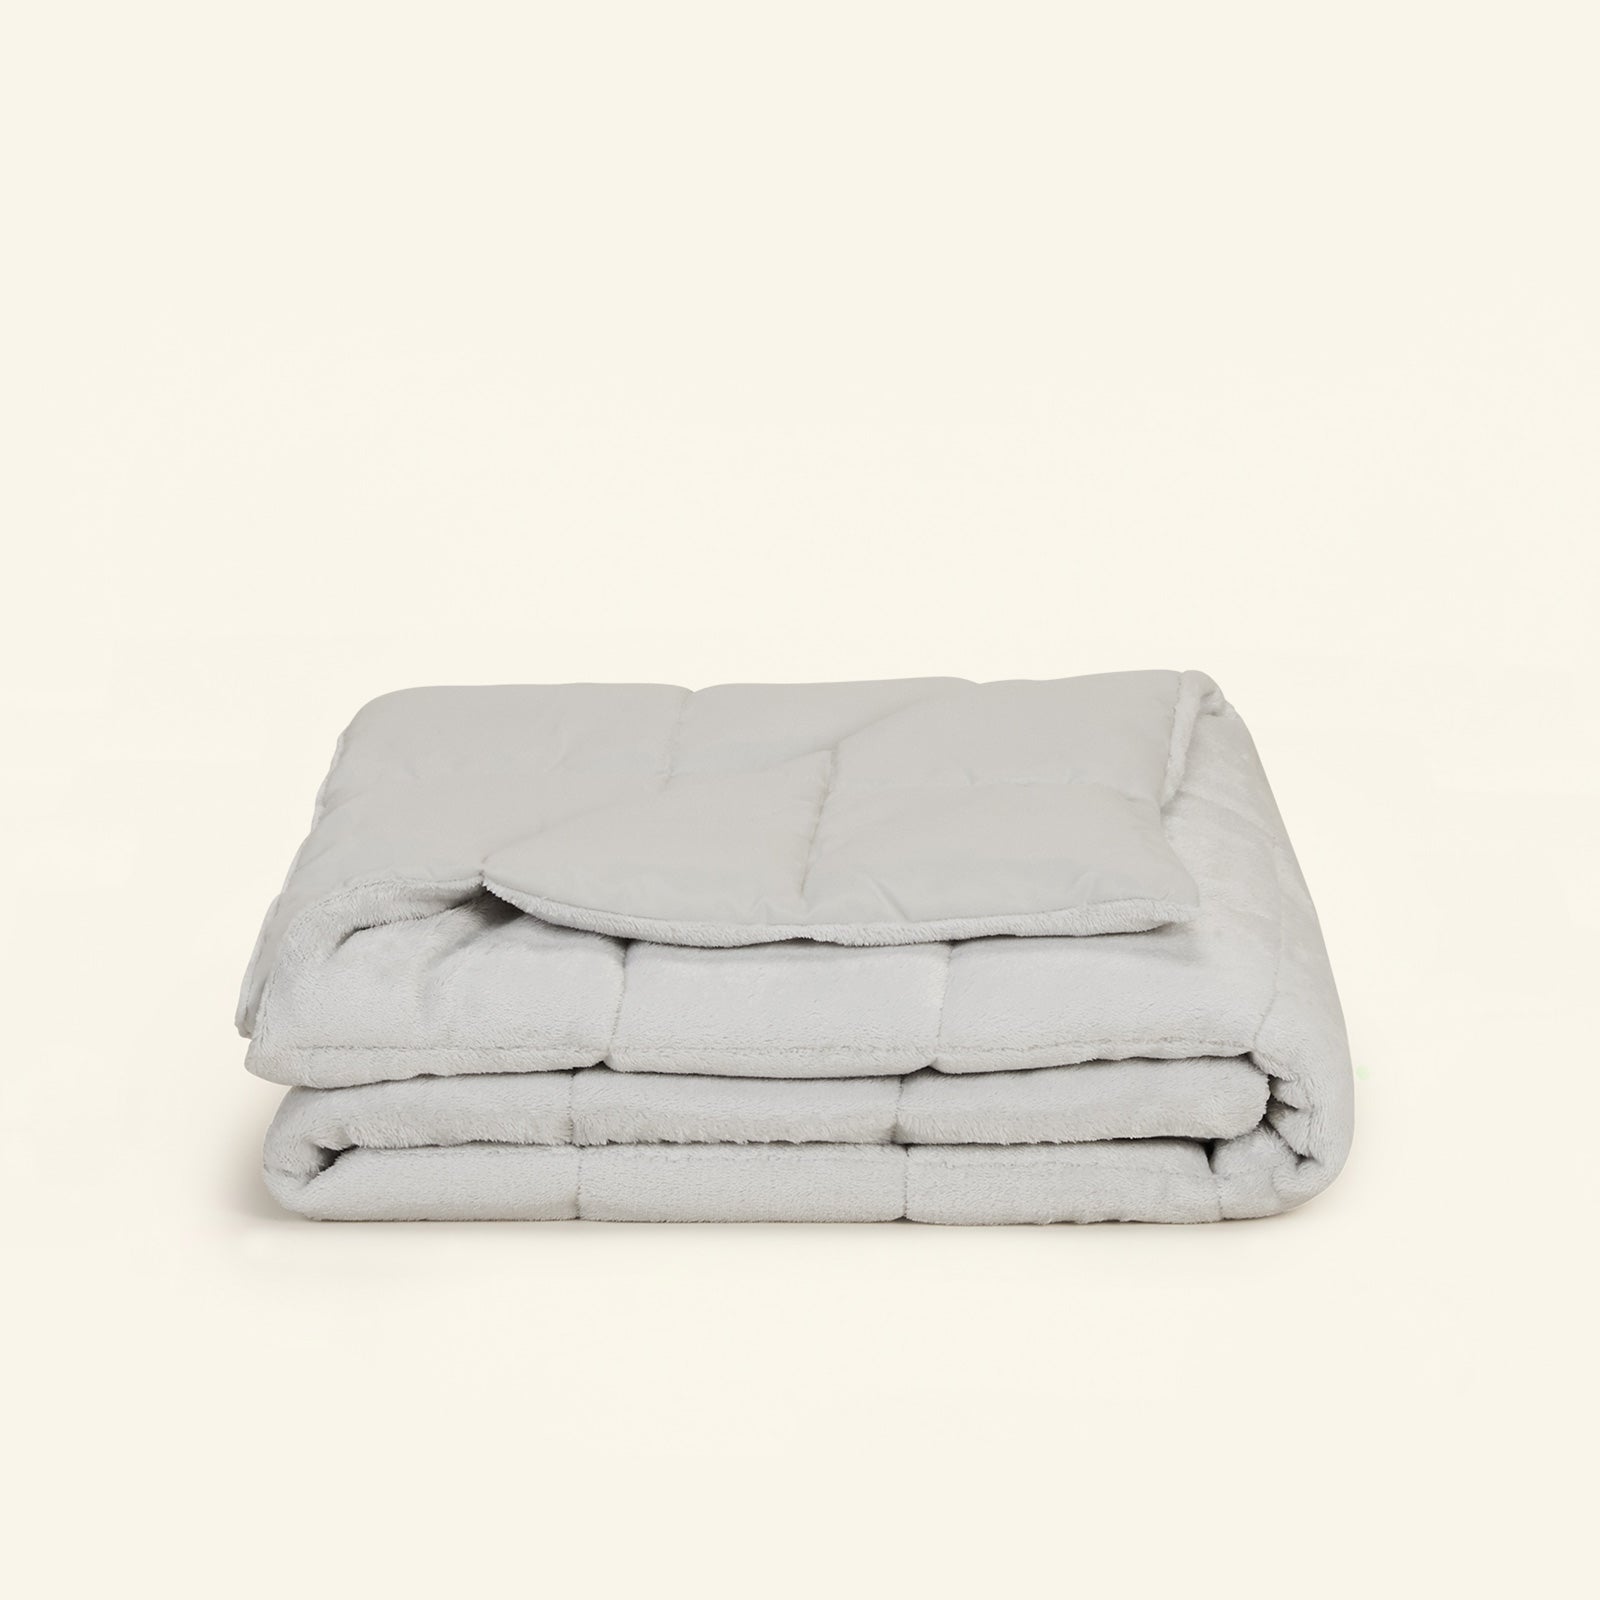 Plush blanket with ClimaDry ™- Fasting performance (152x177cm) American Styled Bedding by Slumber Cloud